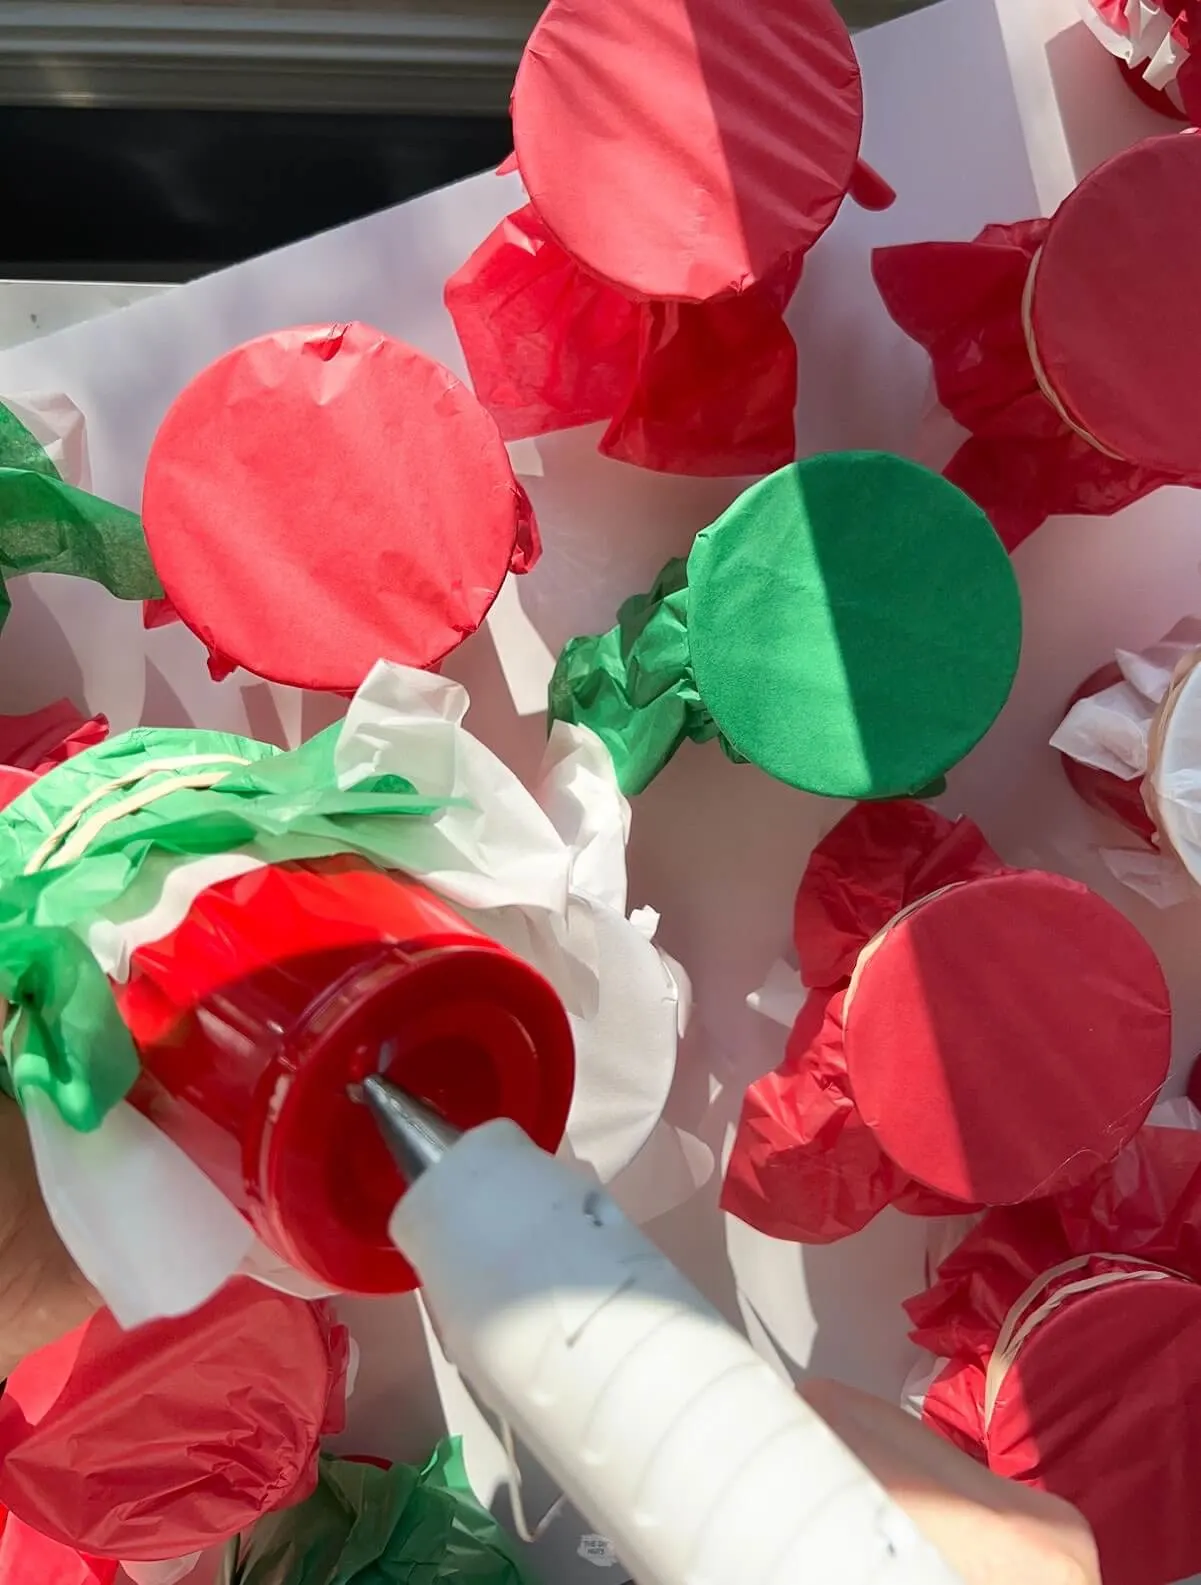 hot glue gun added hot glue to the bottom of a red cup with tissue paper cups in the background.